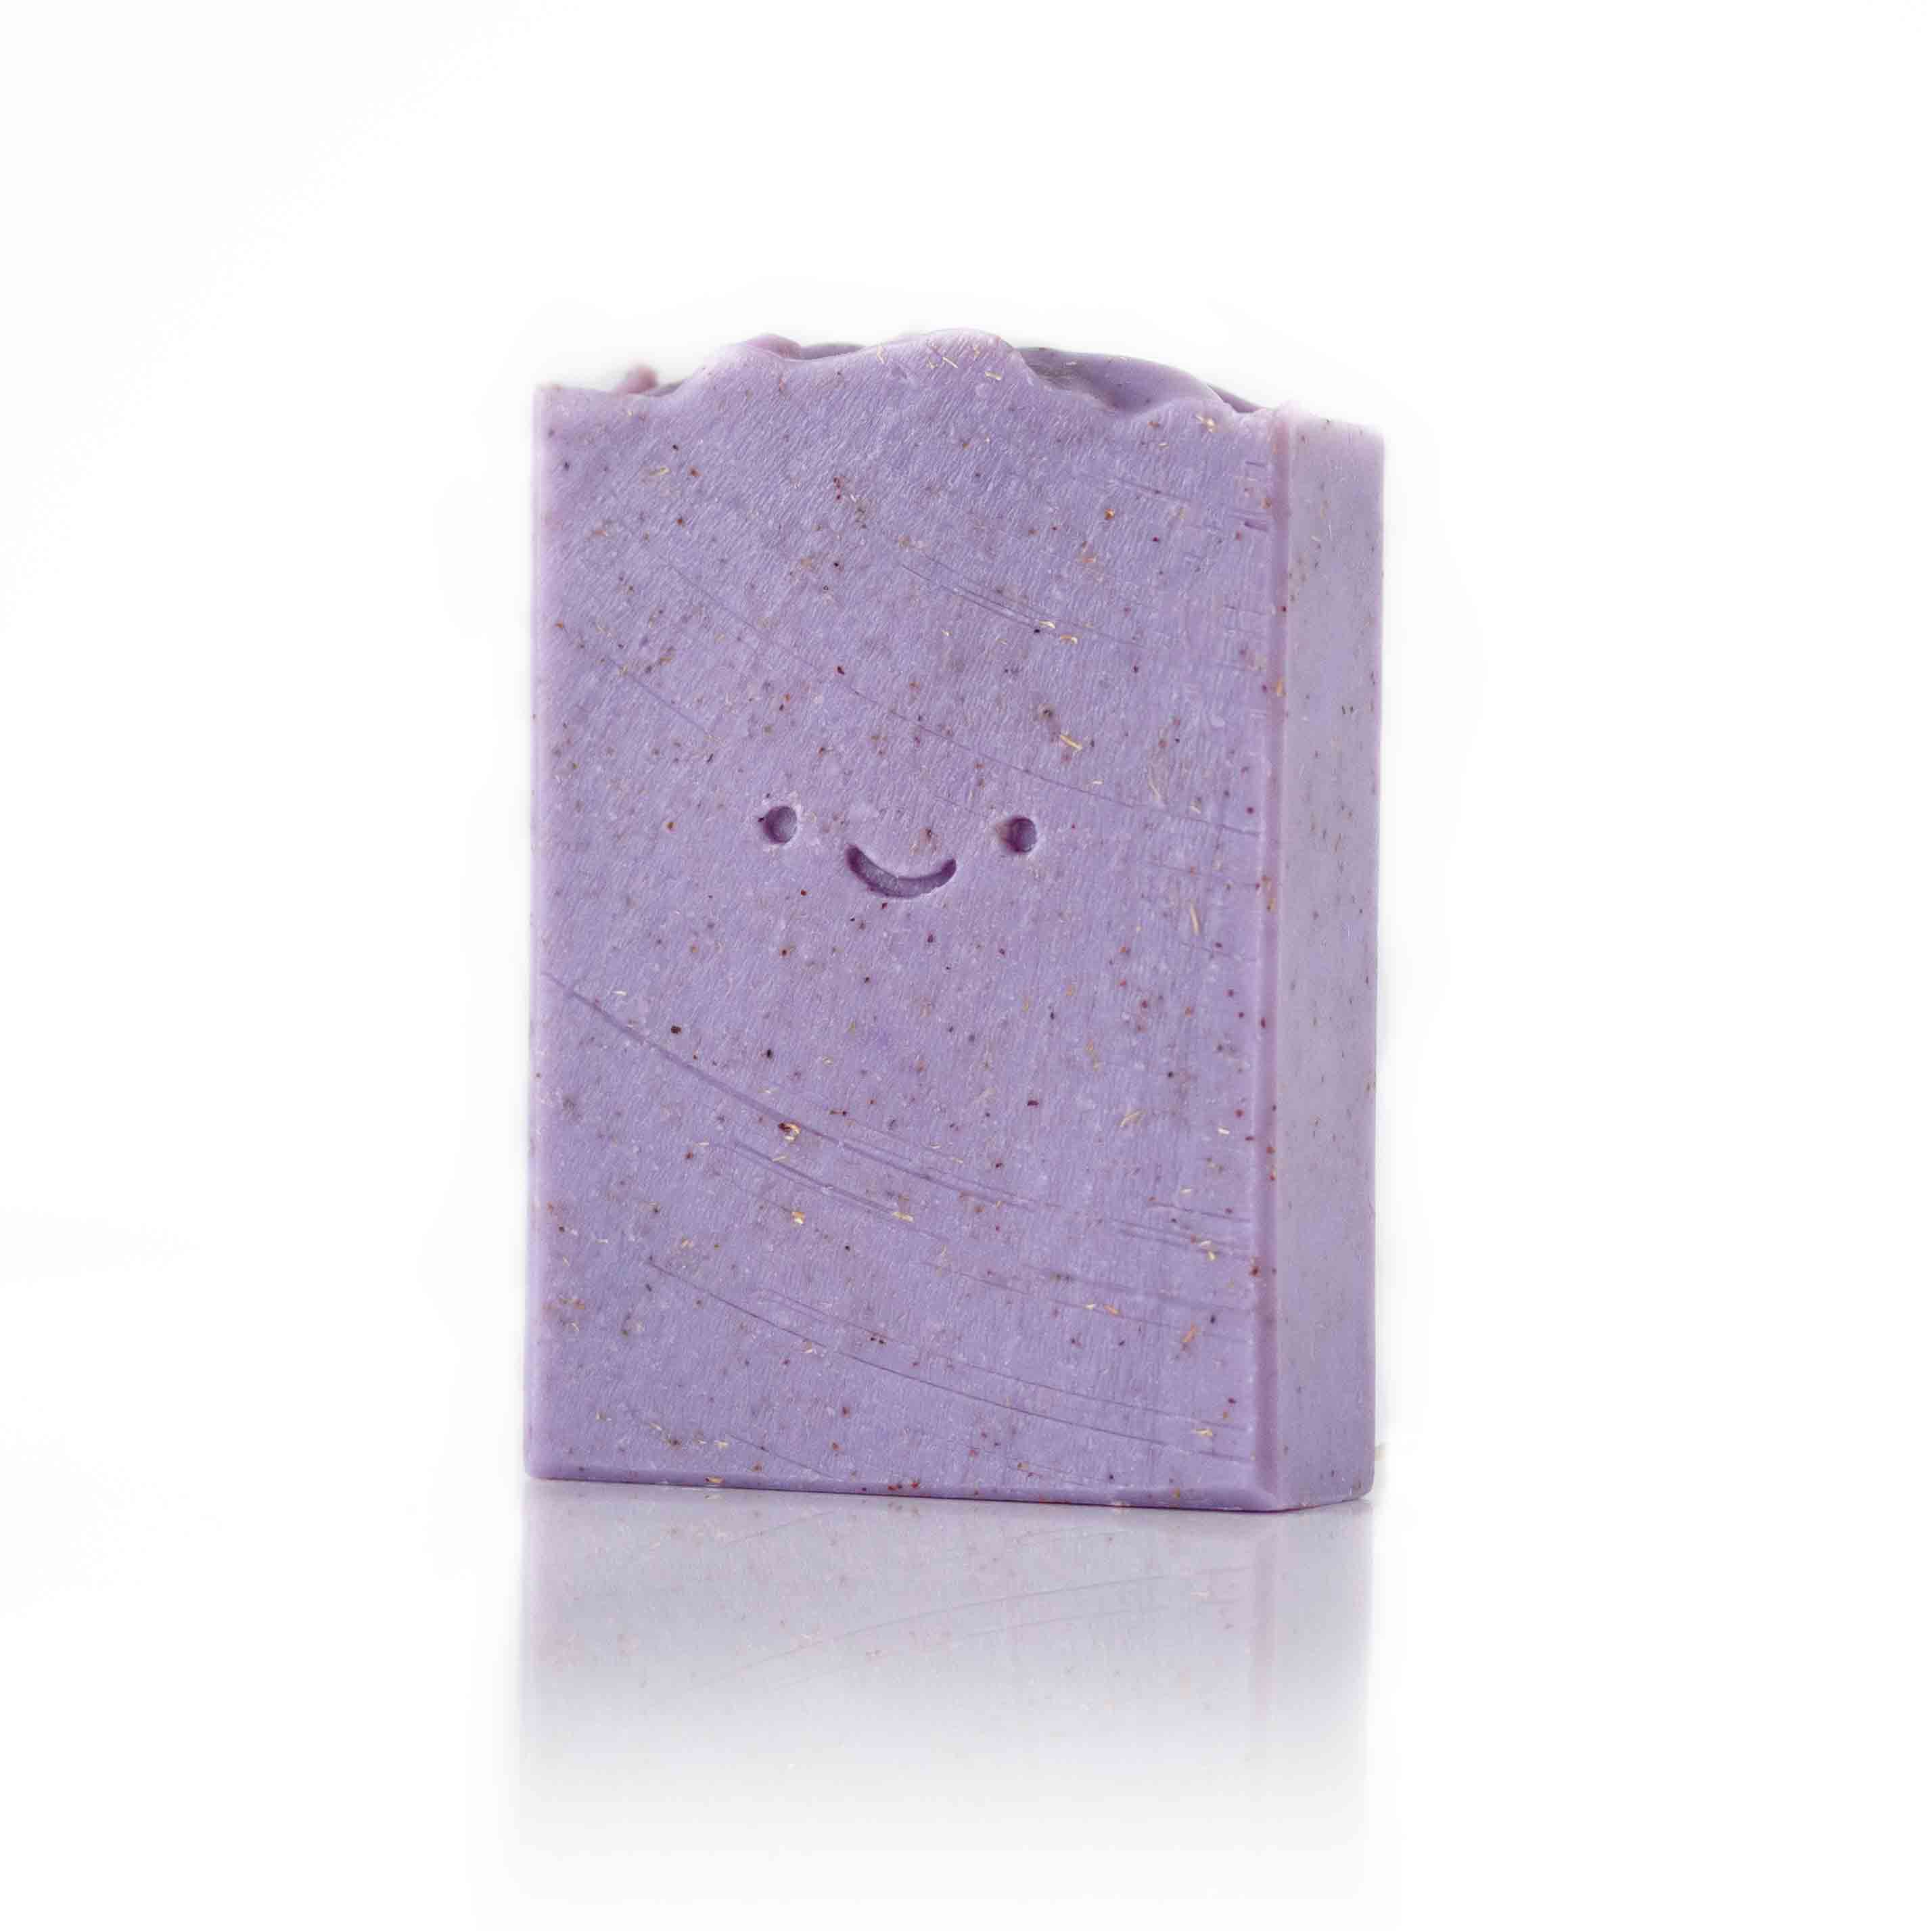 Lavender Exfoliating Handmade Cold Processed Soap by Nurtured by Nature Studio